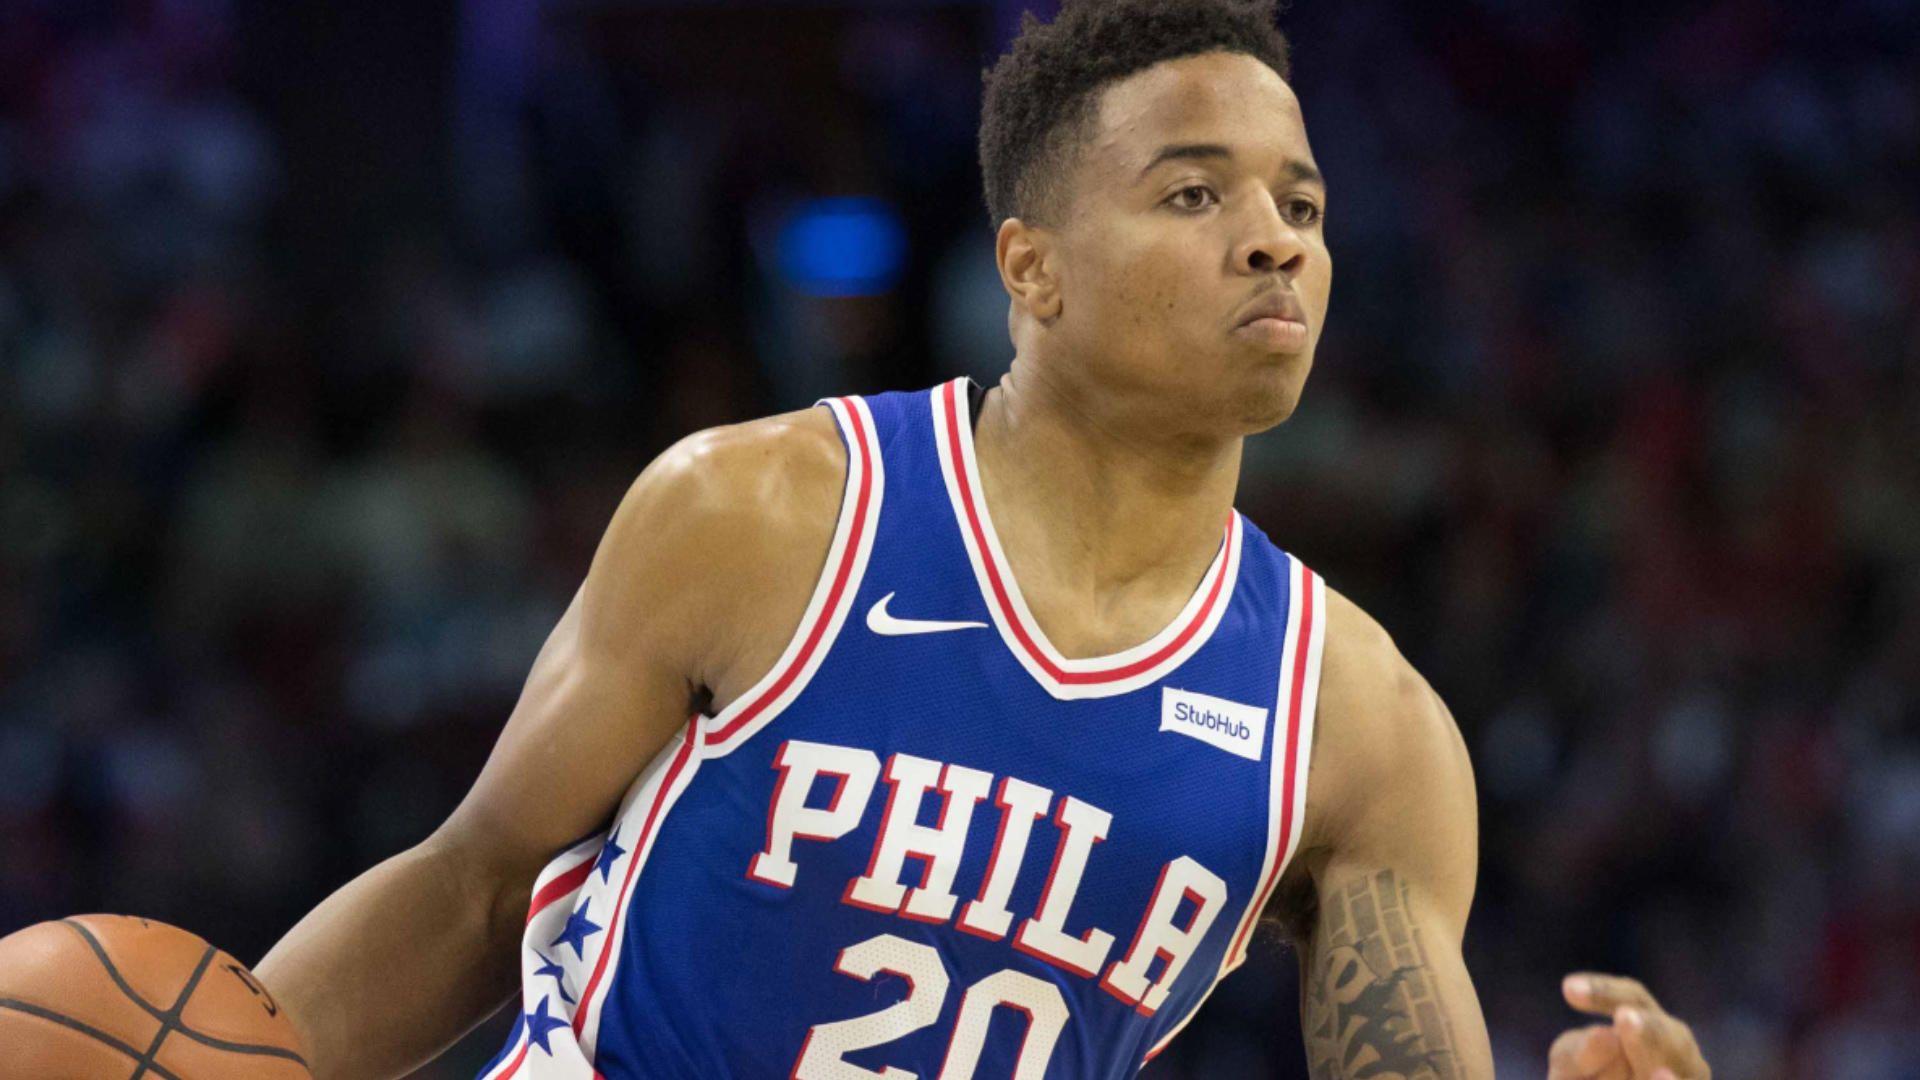 What is going on with Markelle Fultz?